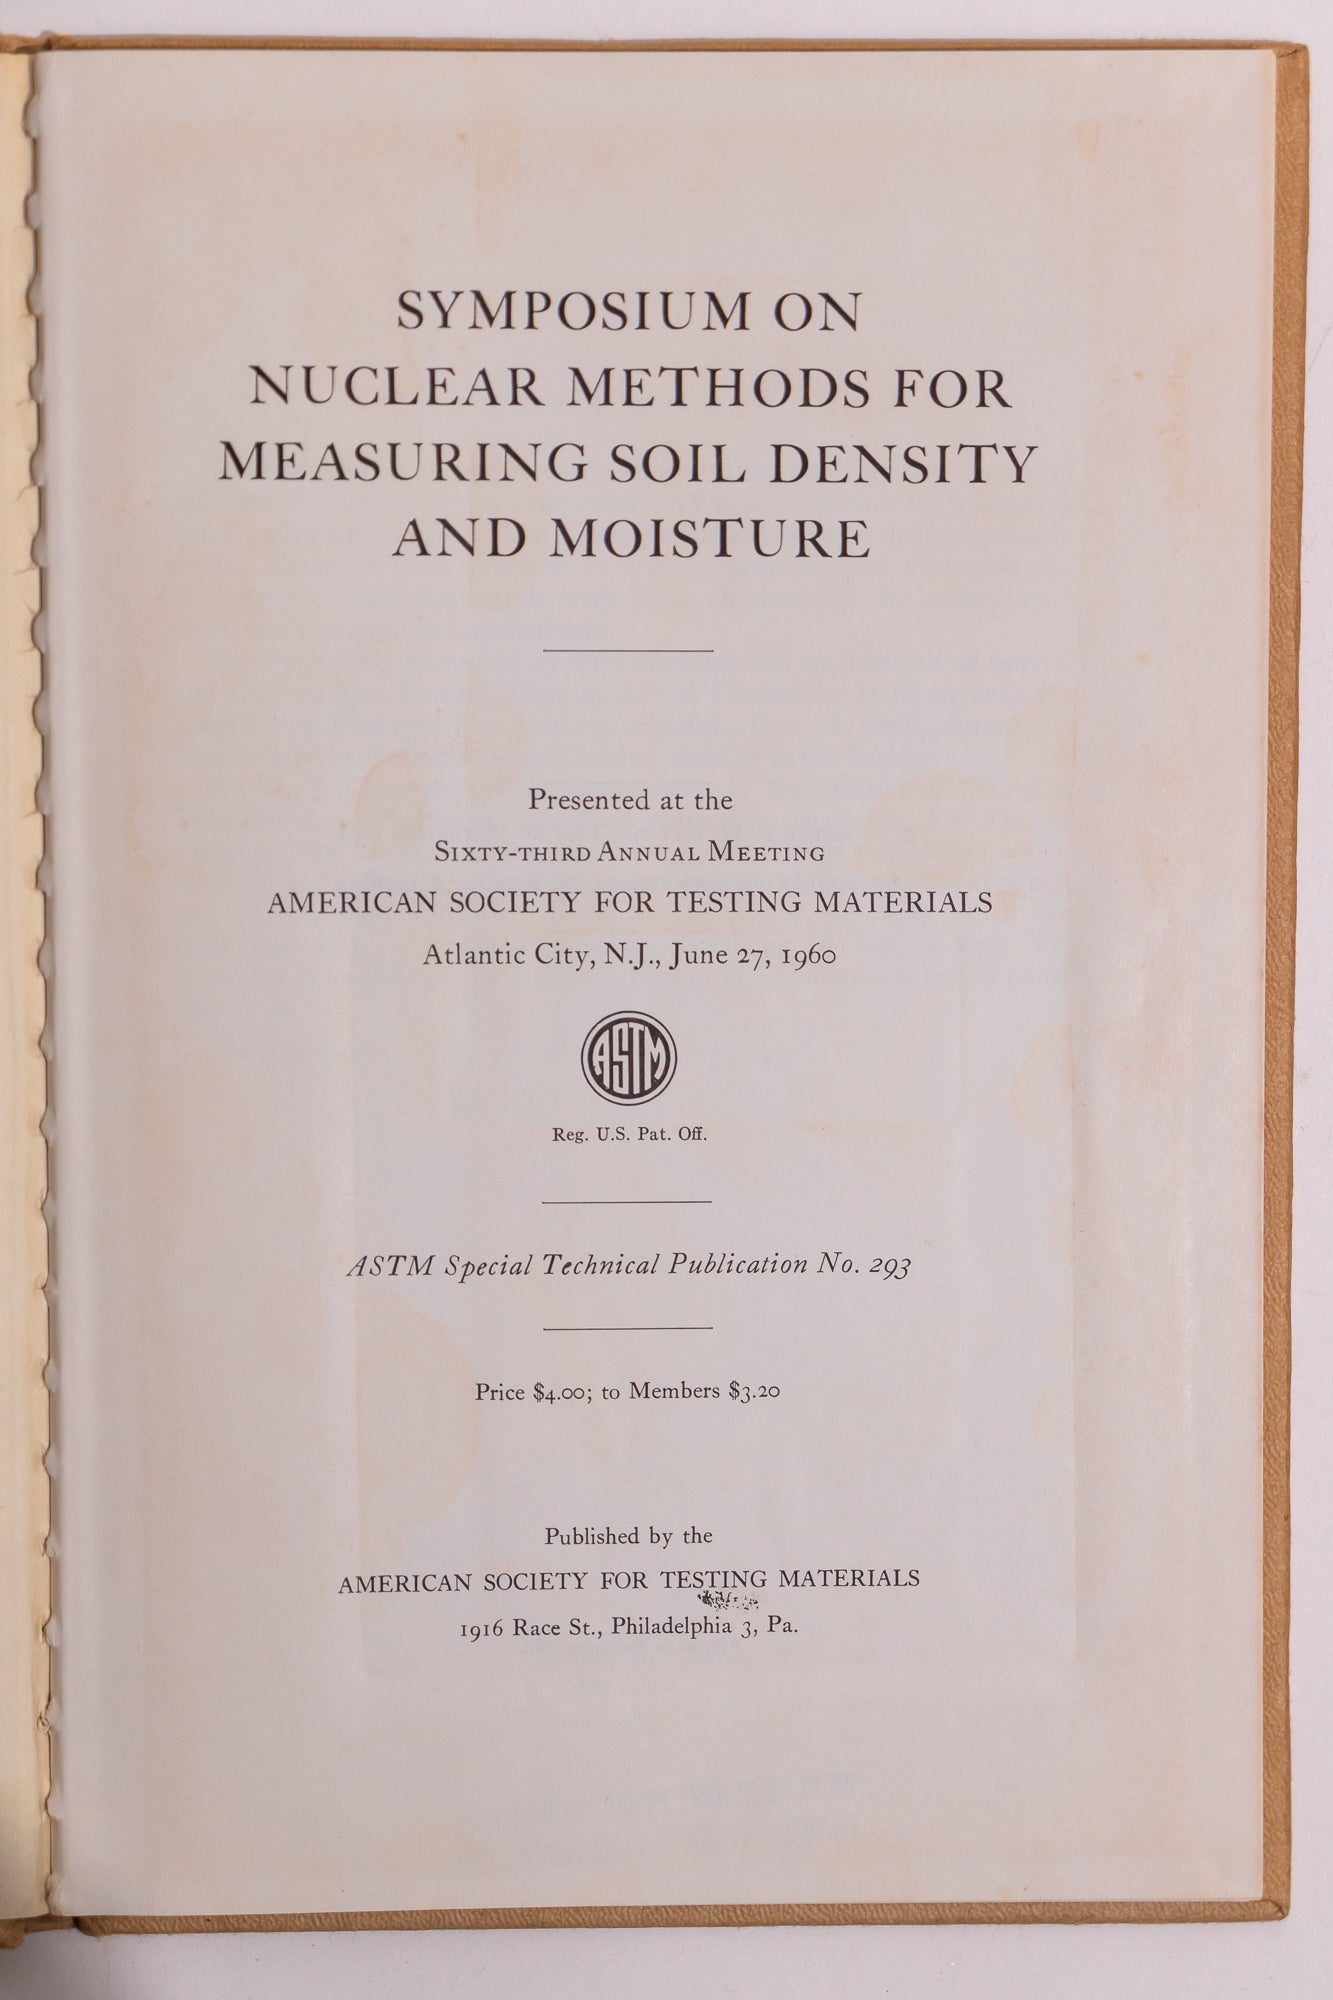 Symposium on Nuclear Methods for Measuring Soil Density and Moisture